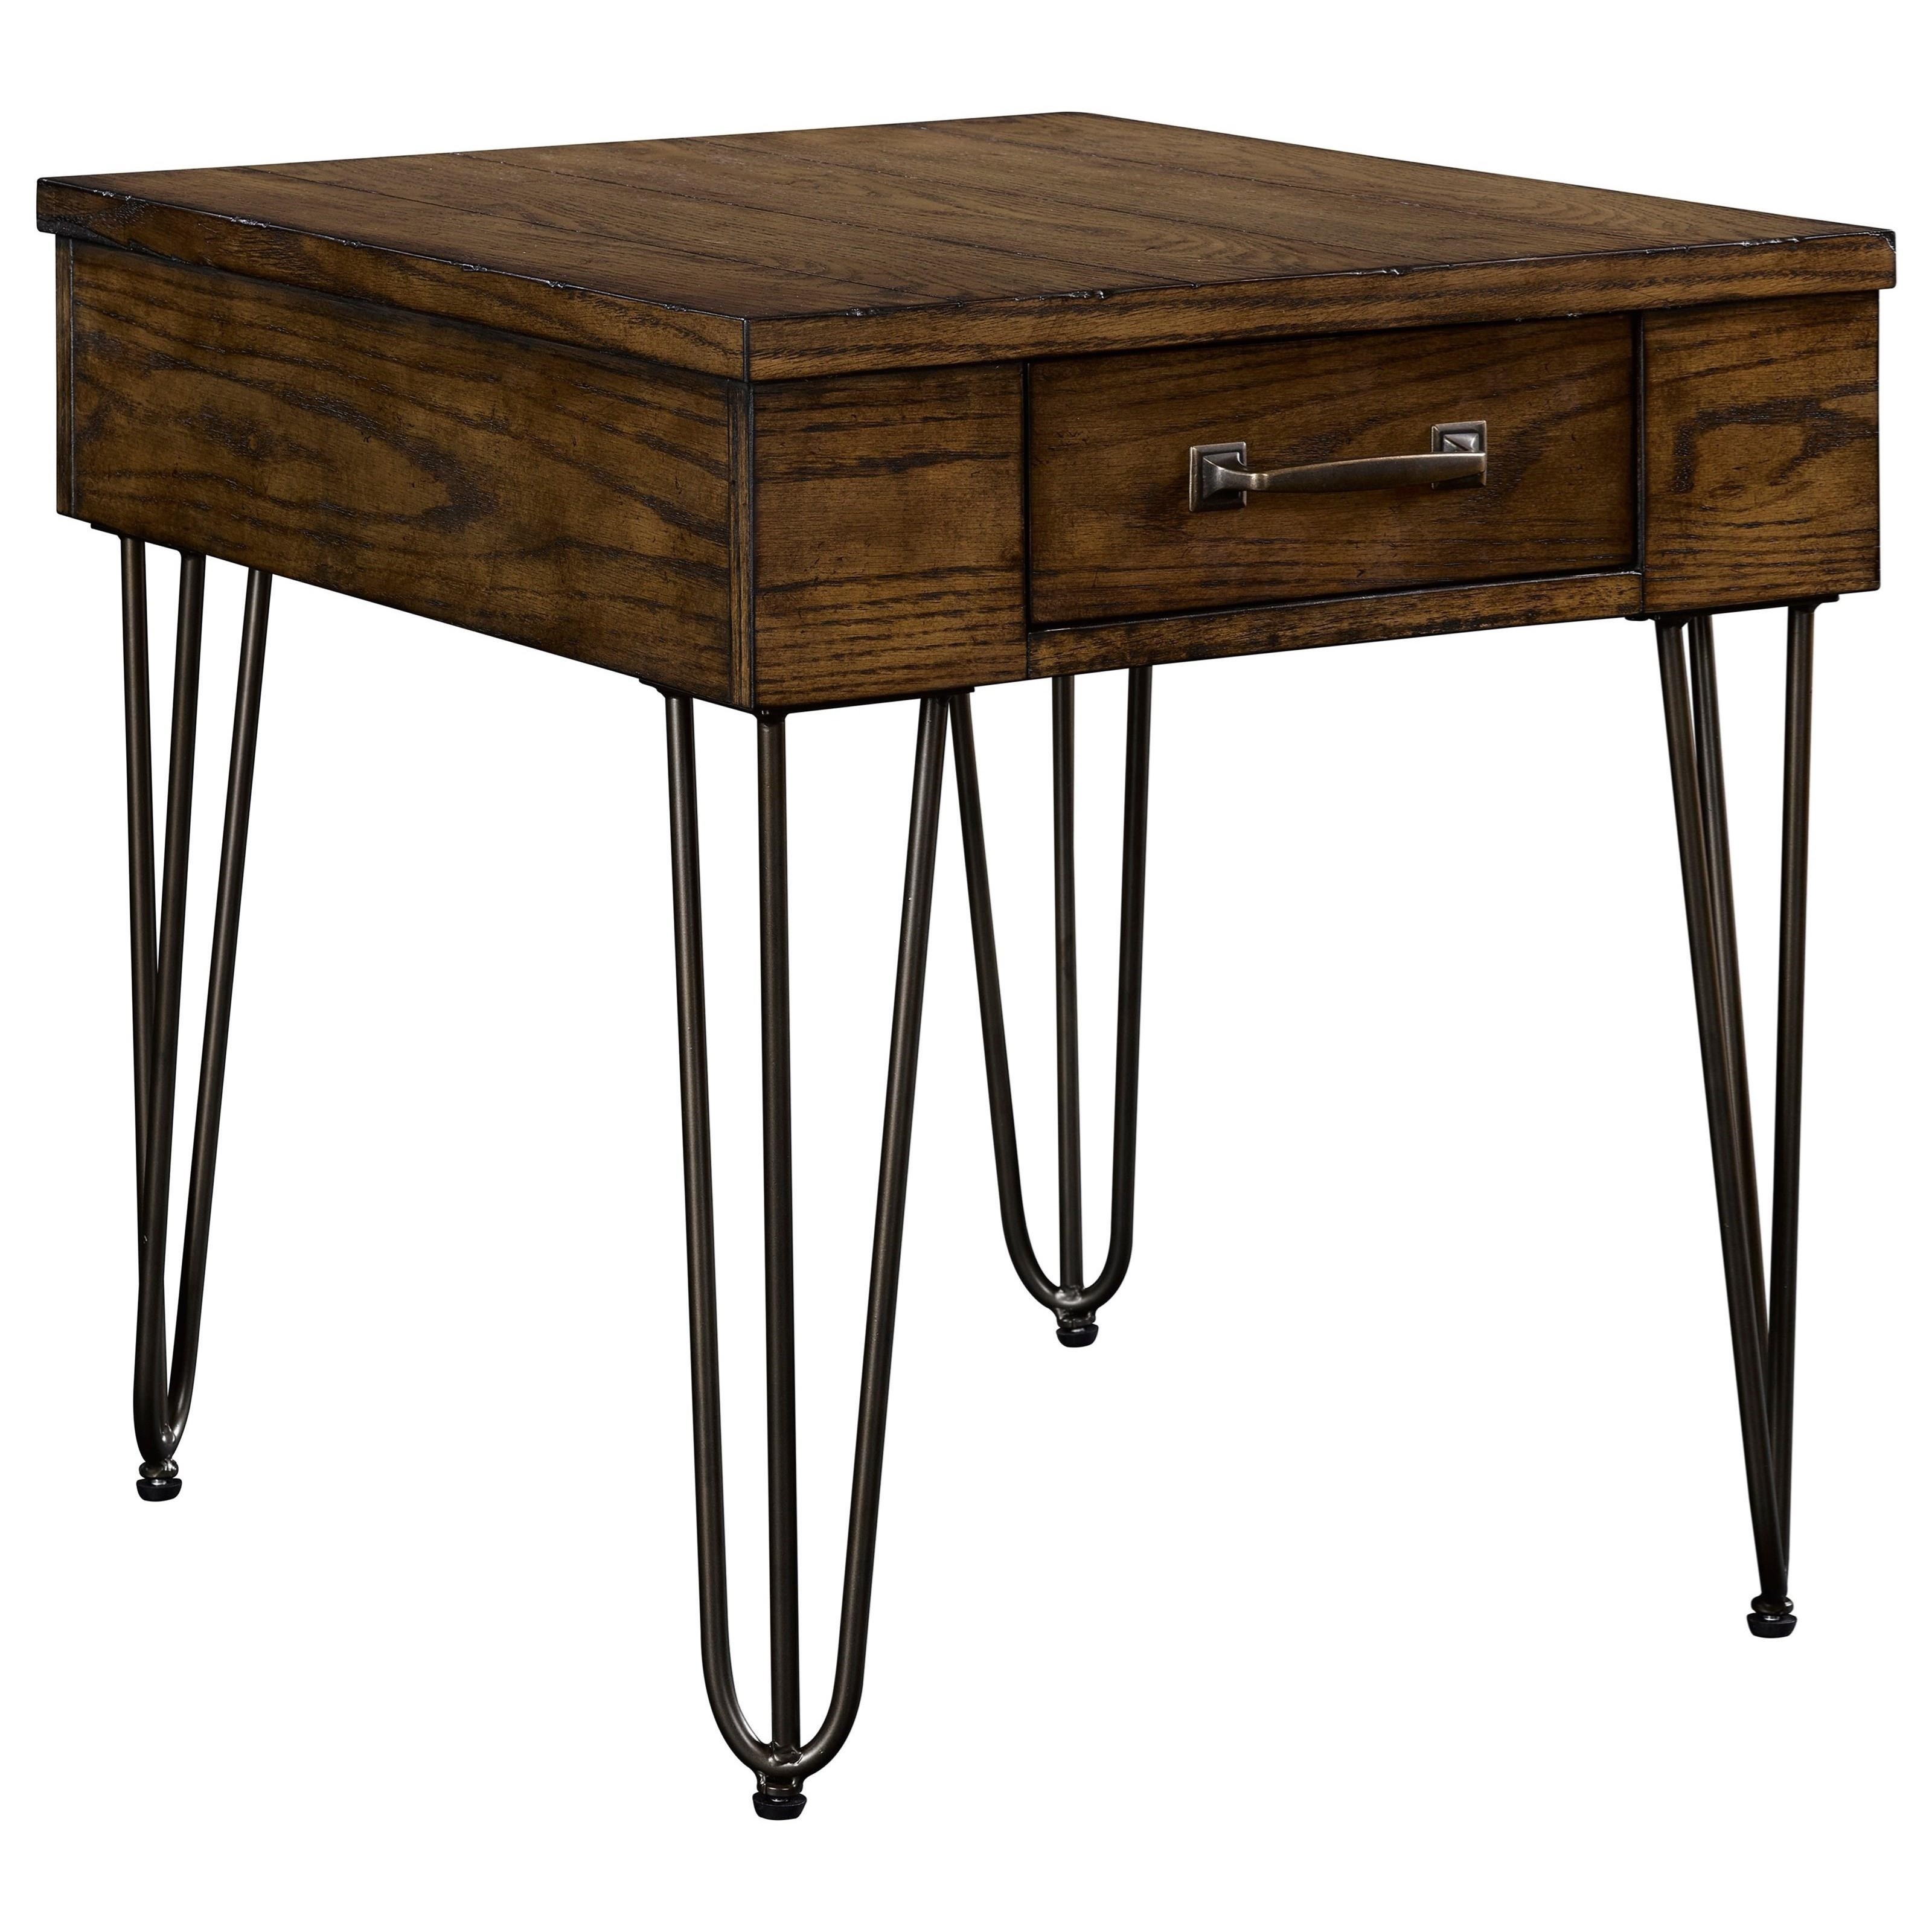 broyhill furniture warren drawer end table with hairpin legs products color wood one accent threshold item number abacus lamp rubber carpet edging trim garden bar ideas cube